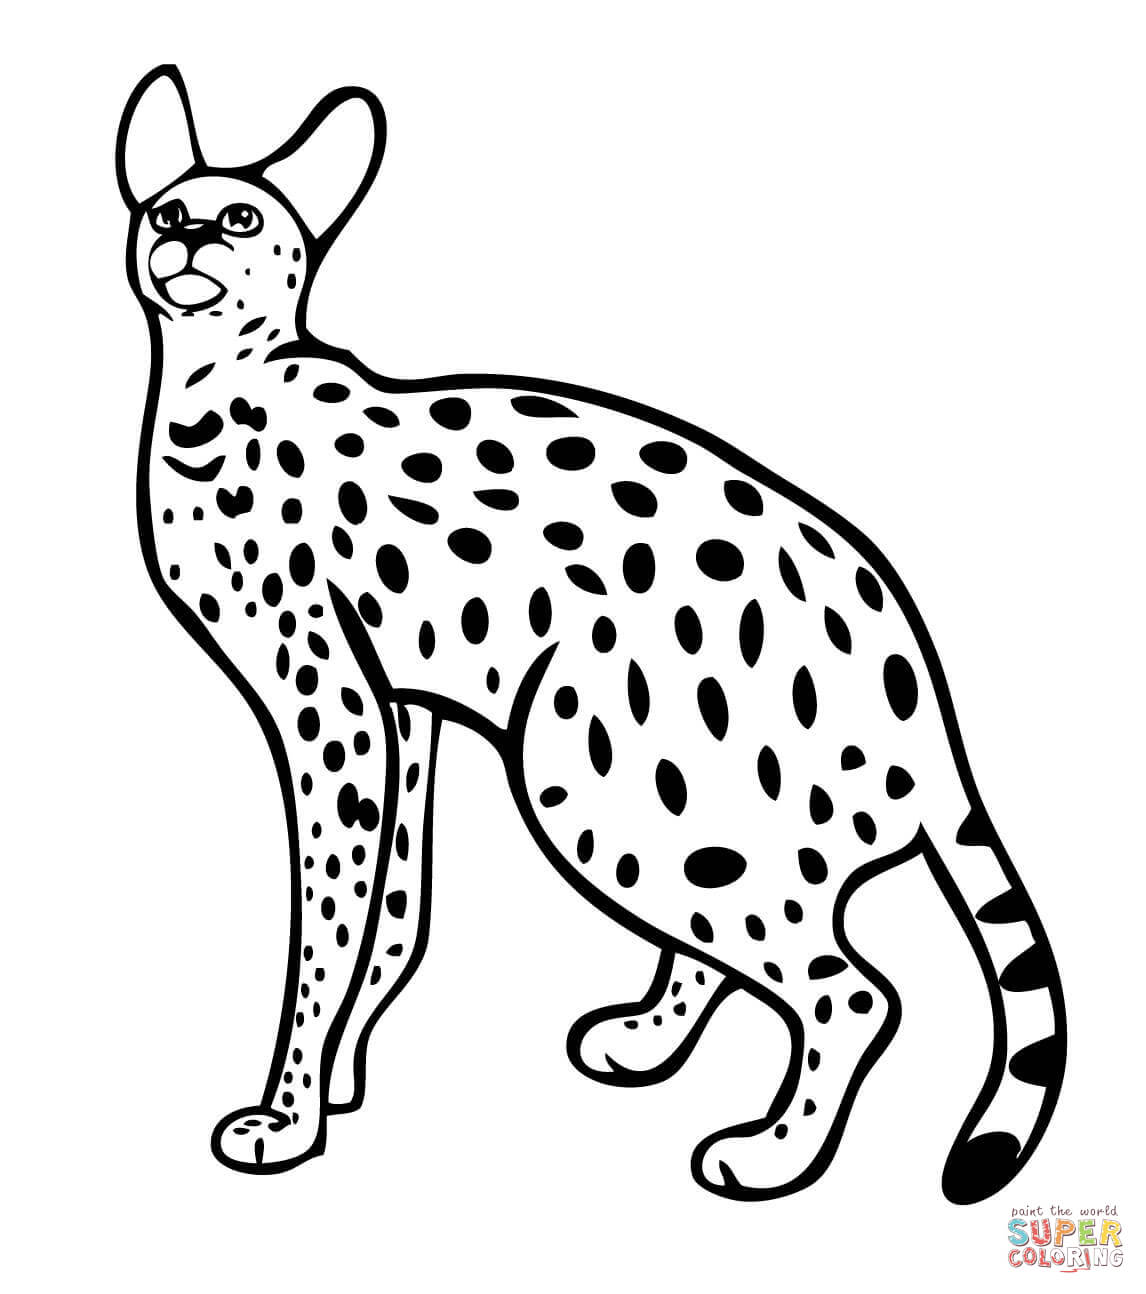 Serval Wild Cat coloring page | Free Printable Coloring Pages